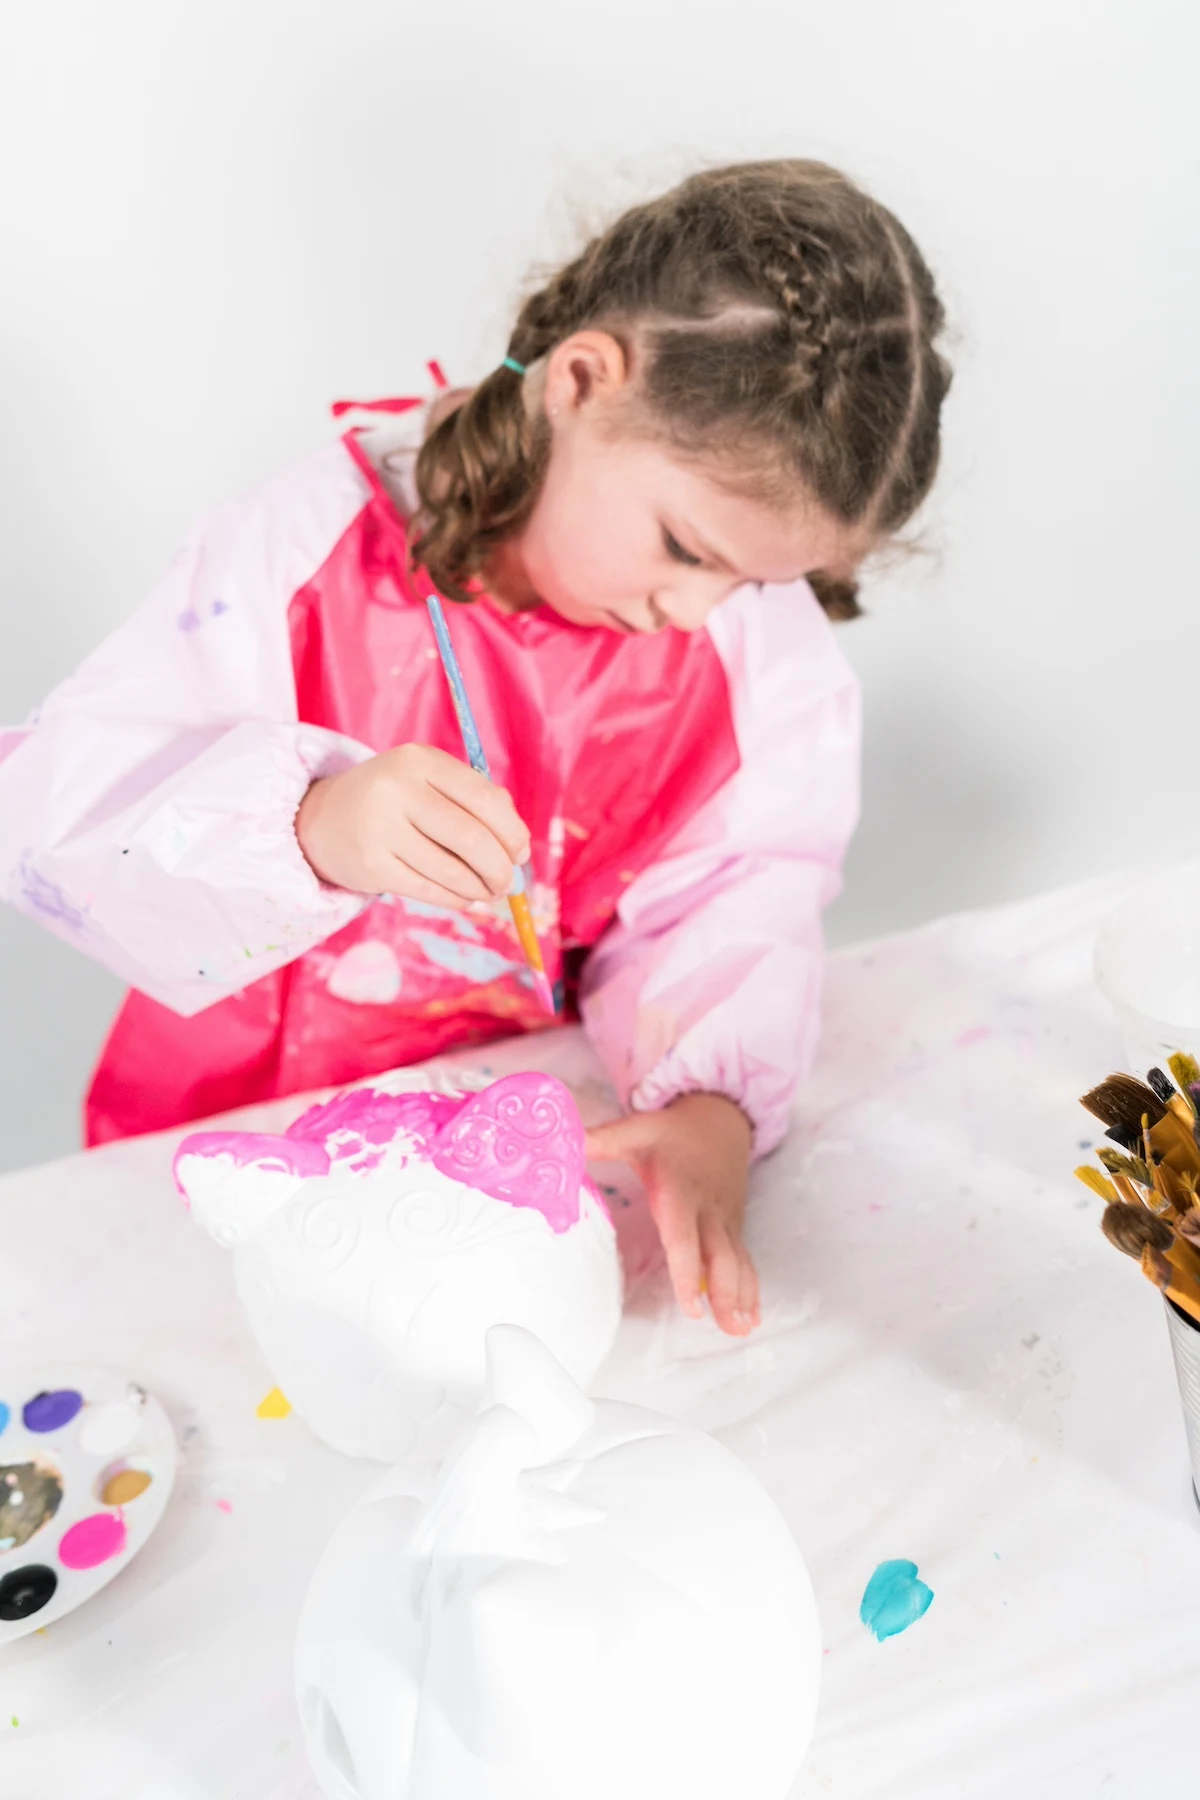 Child-wearing-a-smock-painting-a-surface-with-pink-paint